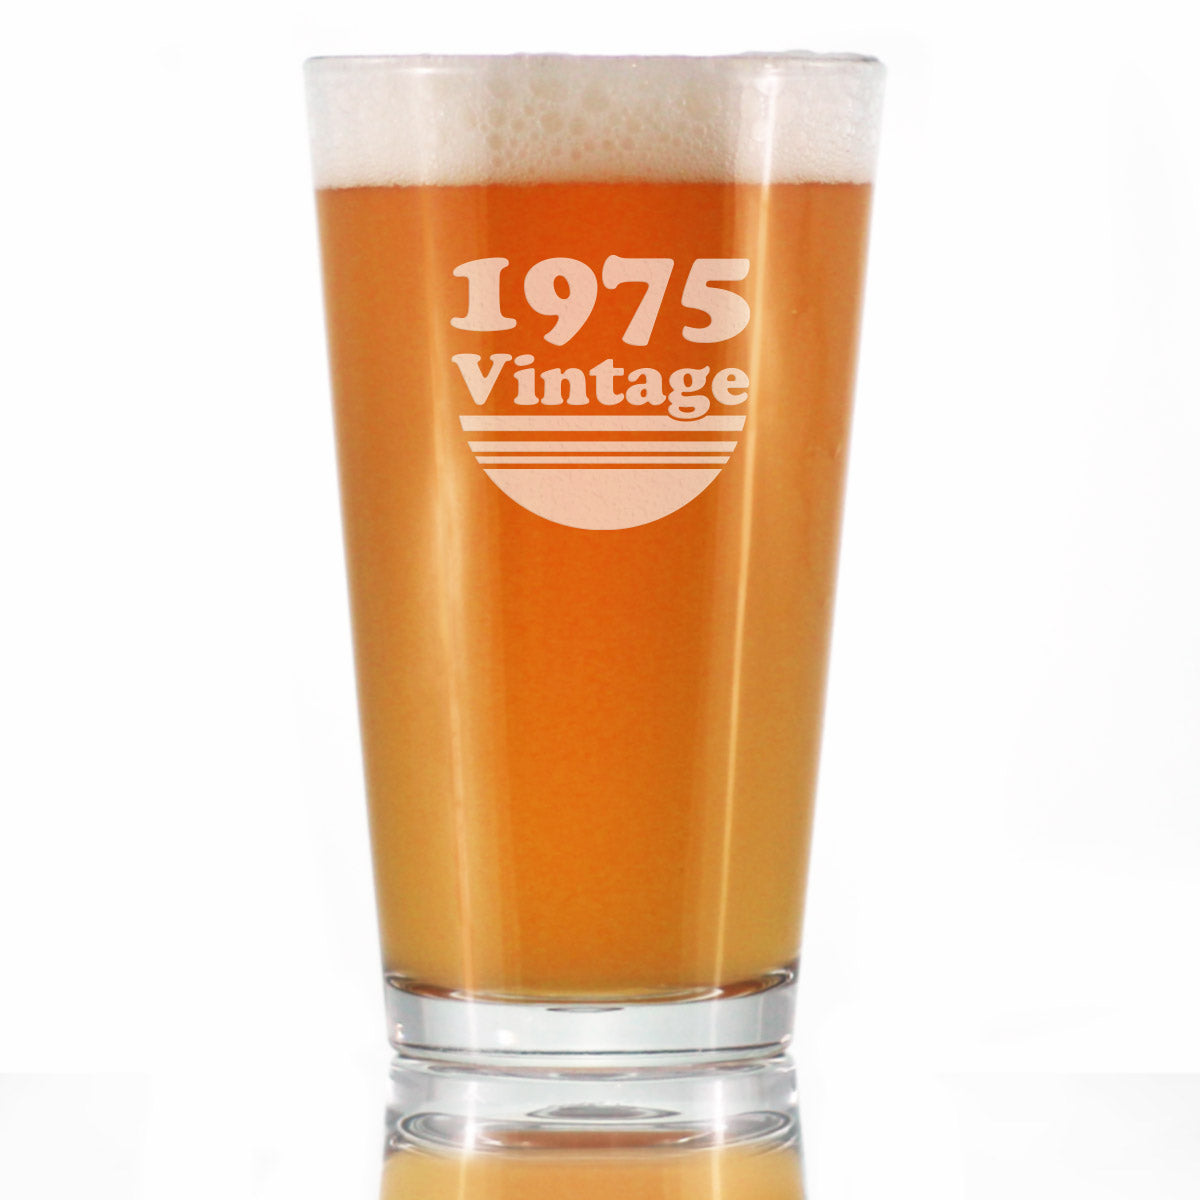 Vintage 1975 - Pint Glass for Beer - 49th Birthday Gifts for Men or Women Turning 49 - Fun Bday Party Decor - 16 oz